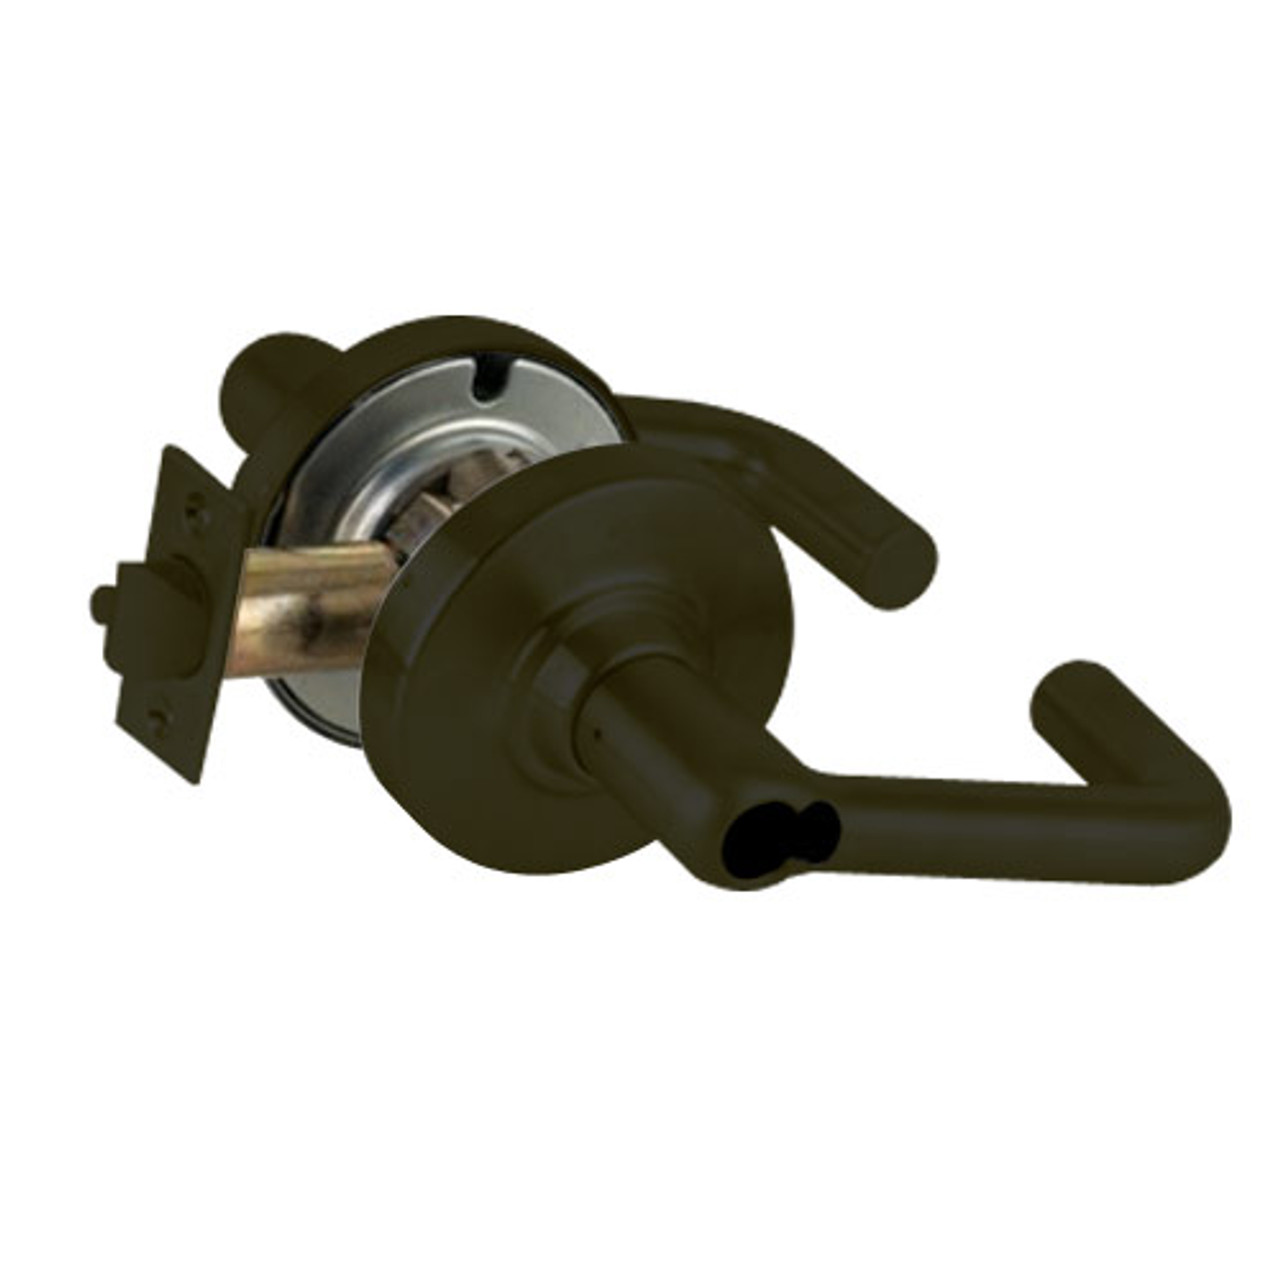 ND70JD-TLR-613 Schlage Tubular Cylindrical Lock in Oil Rubbed Bronze